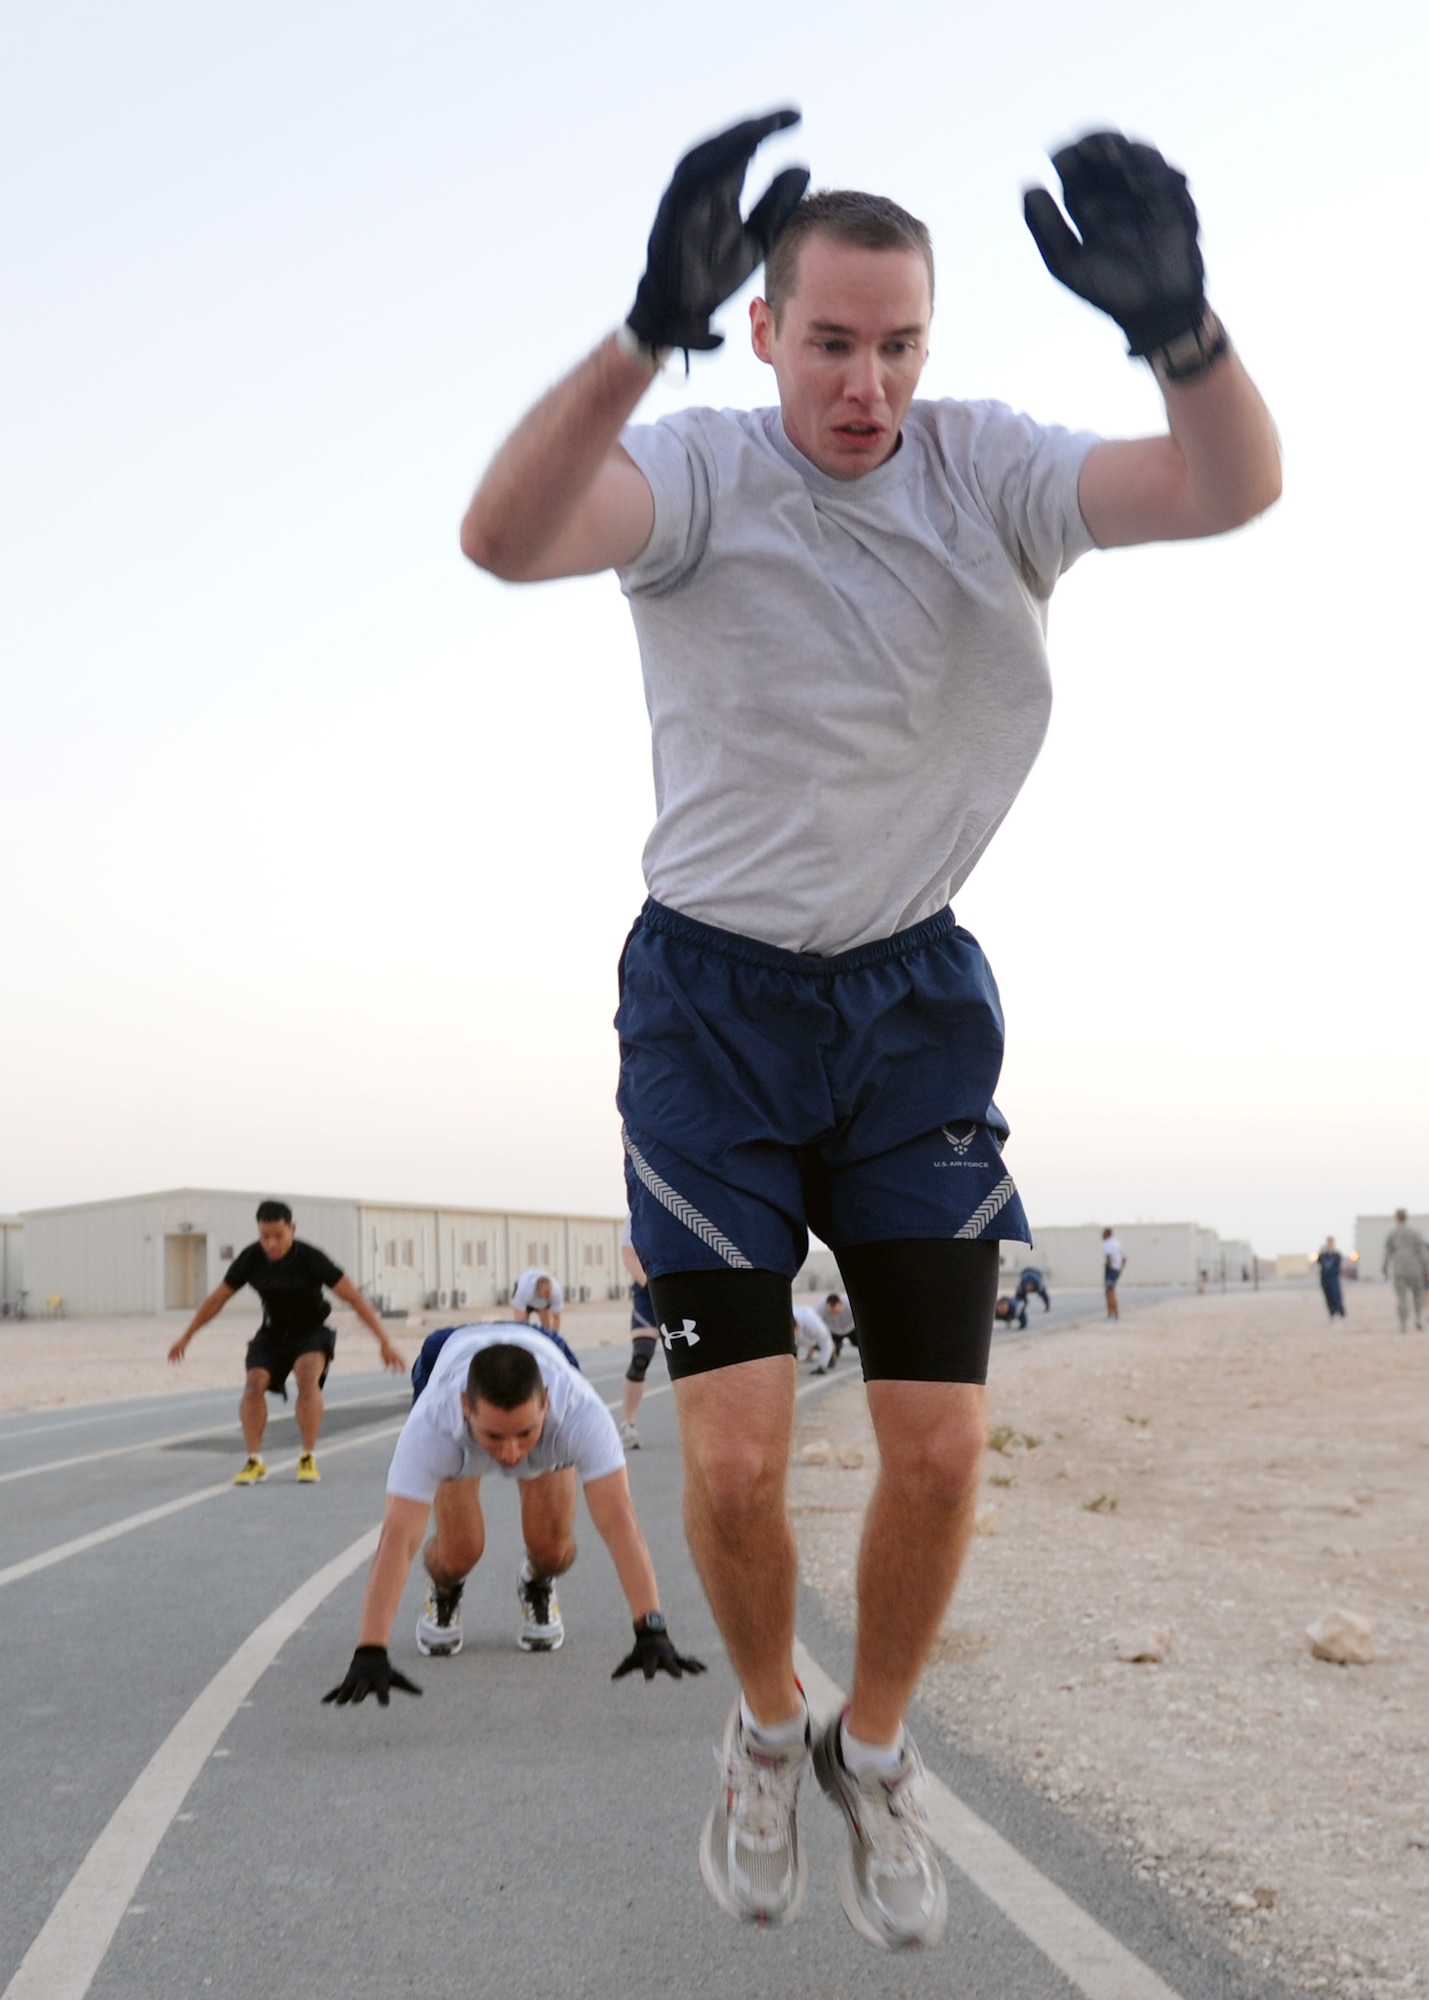 SOUTHWEST ASIA – 1st Lt. Matt Jackson, 609th Air Communications Squadron Detachment 1, takes the lead during the extreme burpee challenge Dec. 1. The lieutenant took first place completing a total of one mile of burpees in 1 hour, 32 minutes and 49 seconds. (U.S. Air Force photo/Senior Airman Joel Mease)